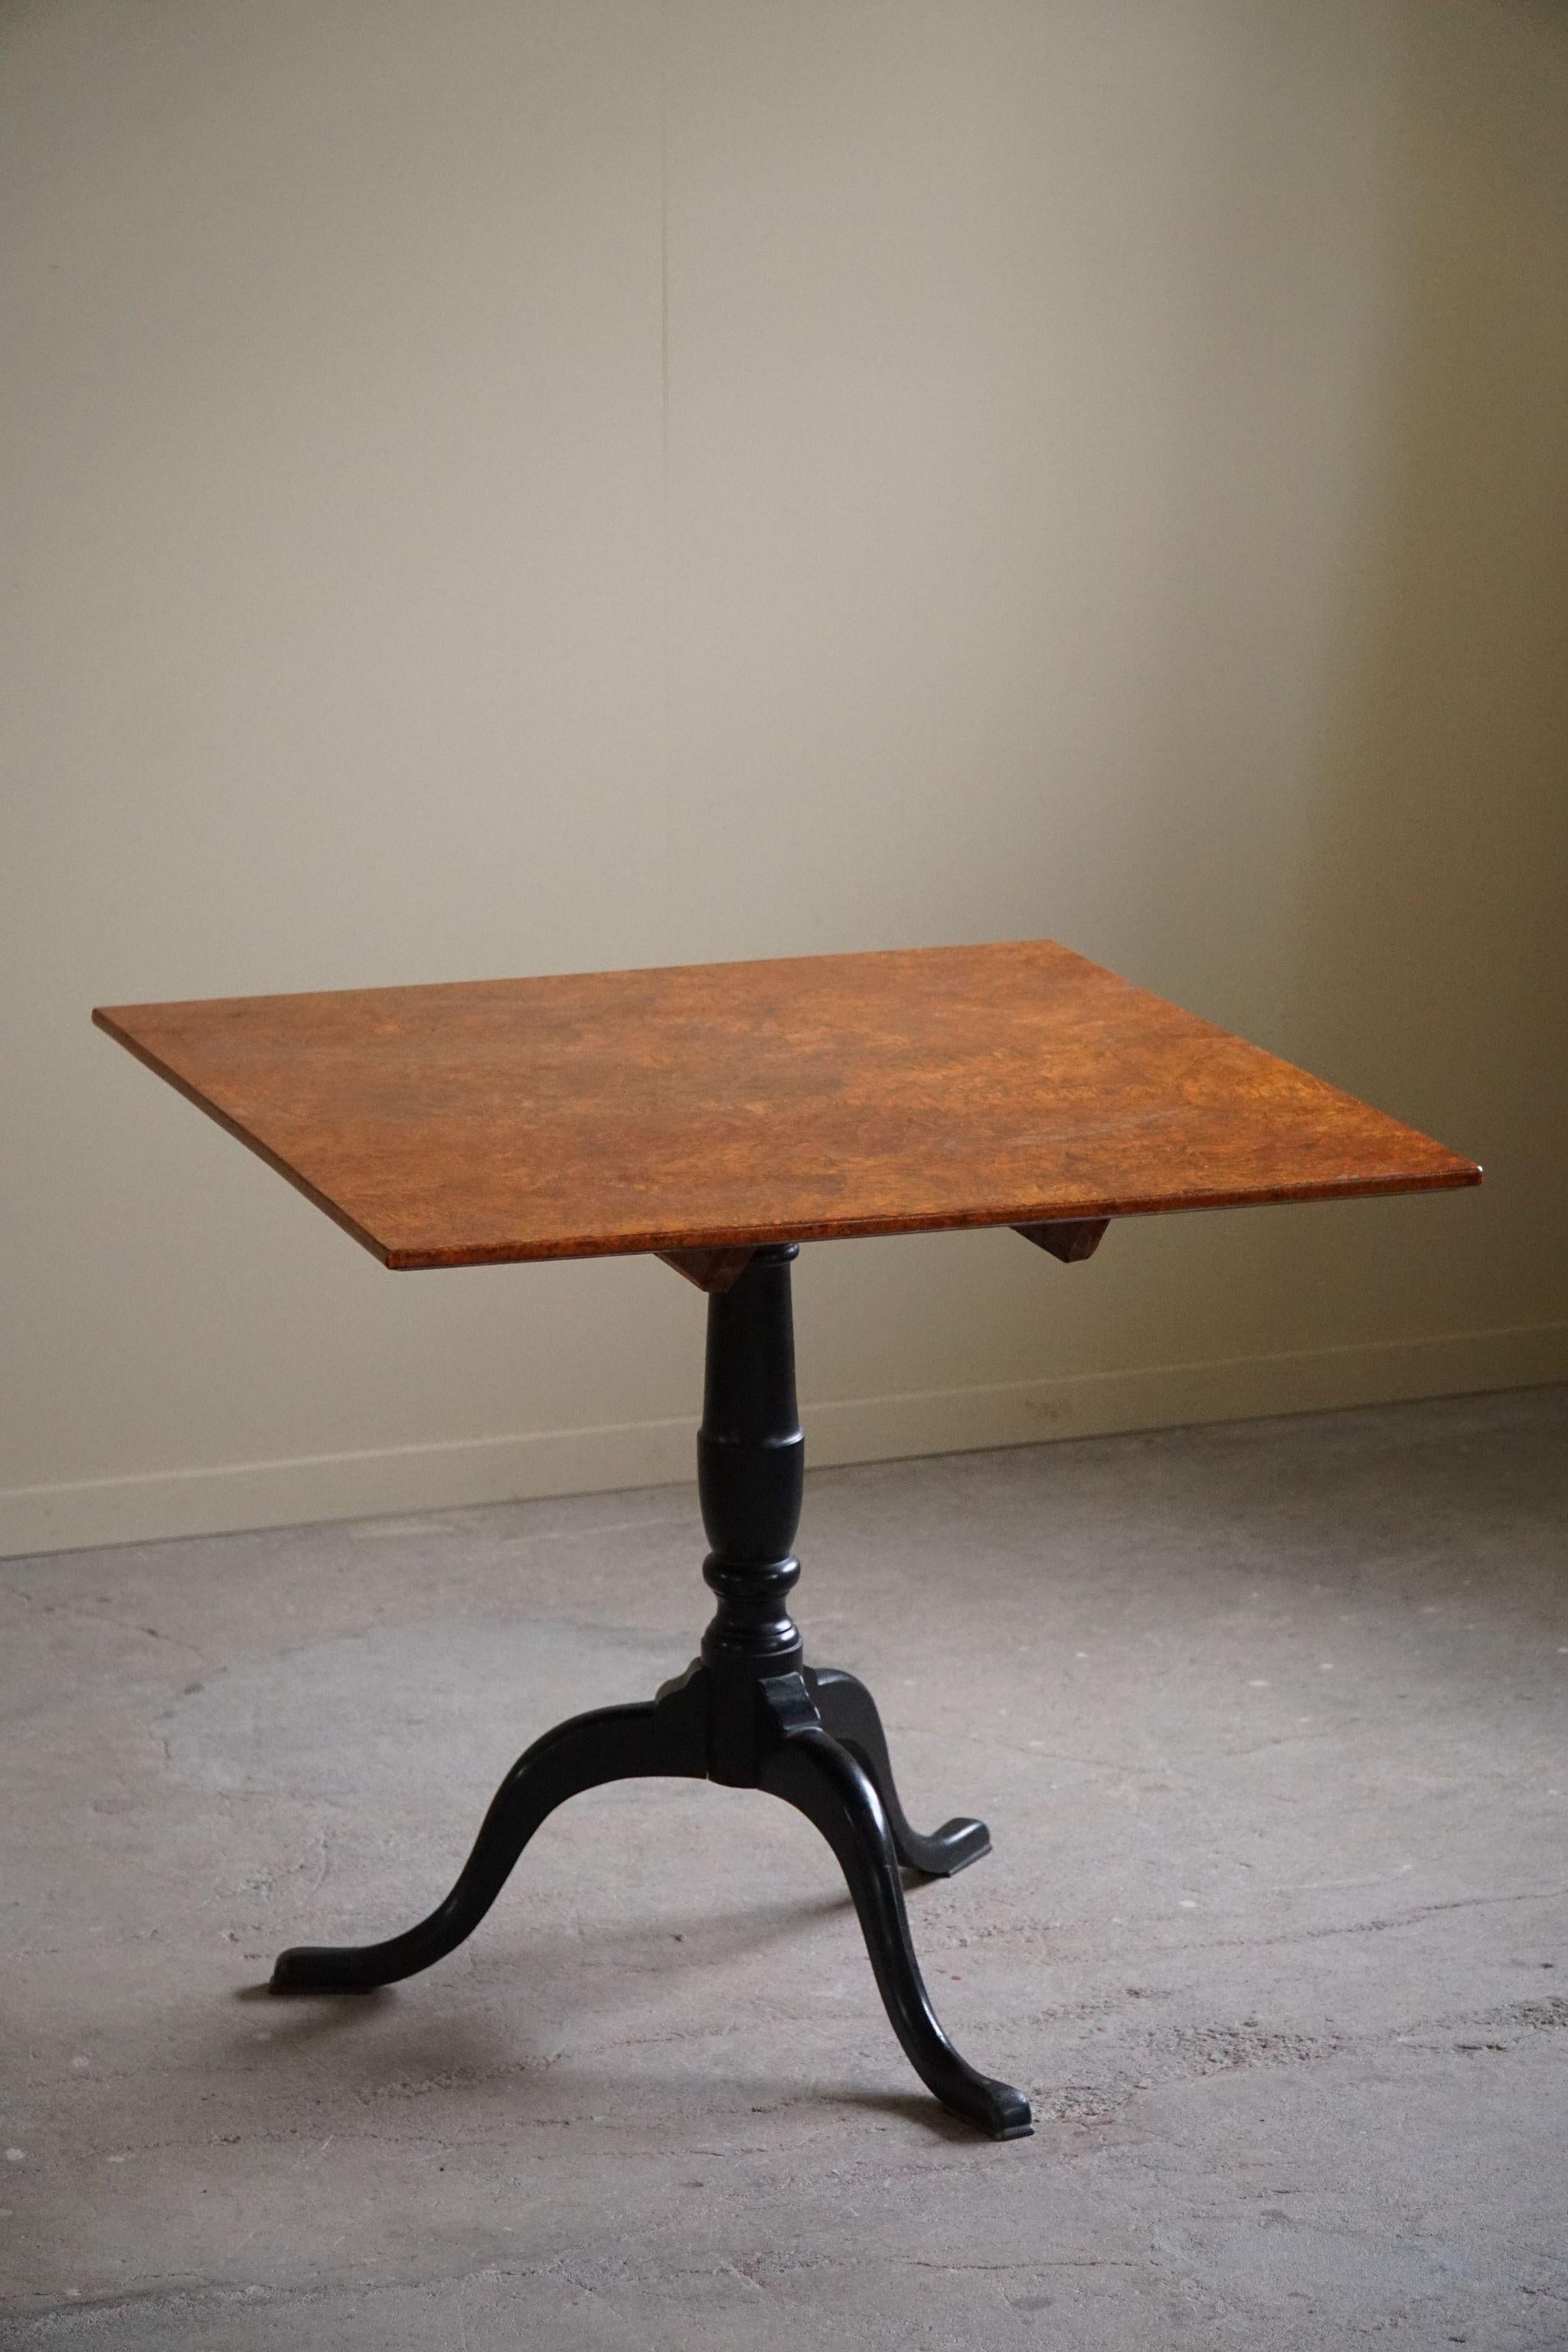 Handcrafted Square Antique Drop Leaf Table in Burl Wood, Swedish, 19th Century For Sale 2